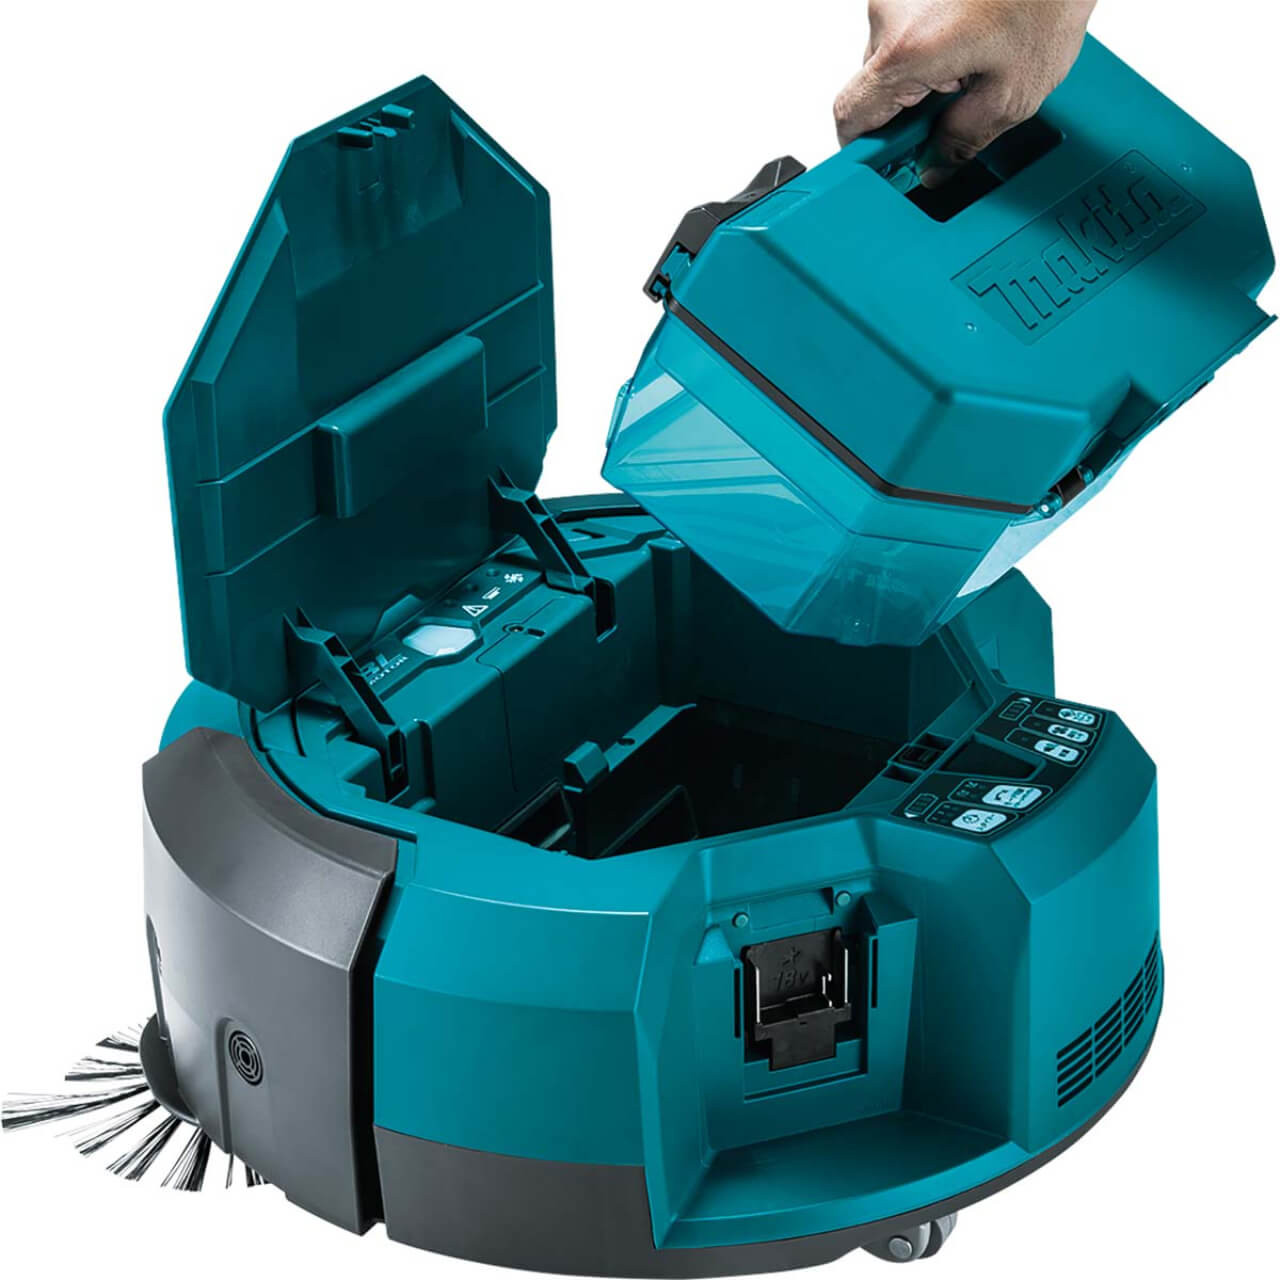 Makita 18Vx2 BRUSHLESS Robotic Vacuum Cleaner - Tool Only